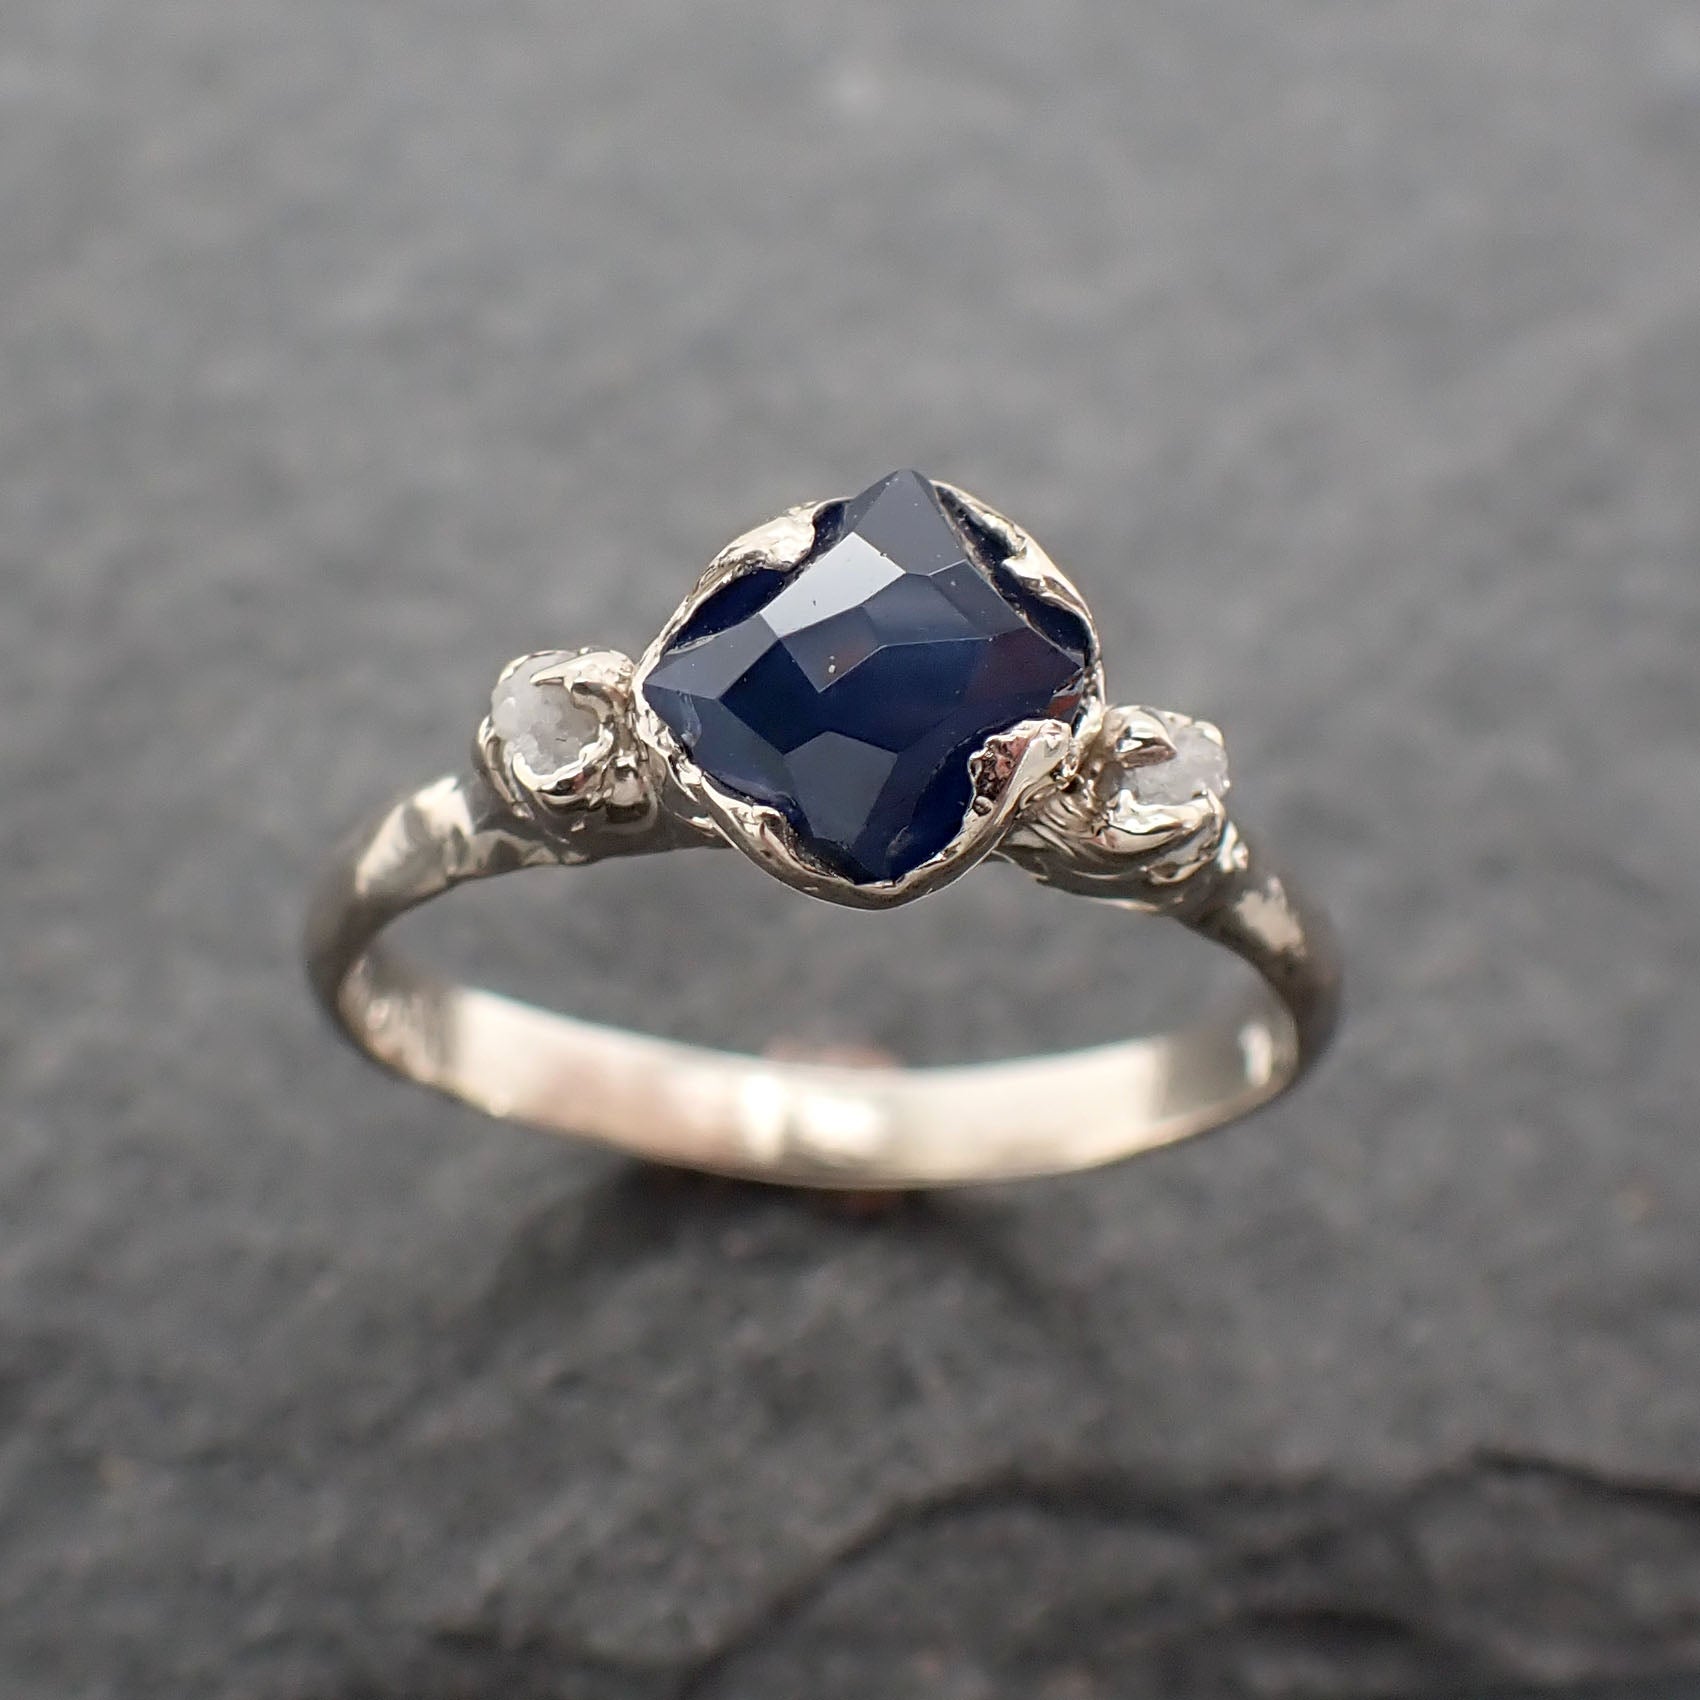 Partially faceted Dainty Sapphire Diamond 14k White Gold Engagement Ring Wedding Ring blue Gemstone Ring Multi stone Ring 2444